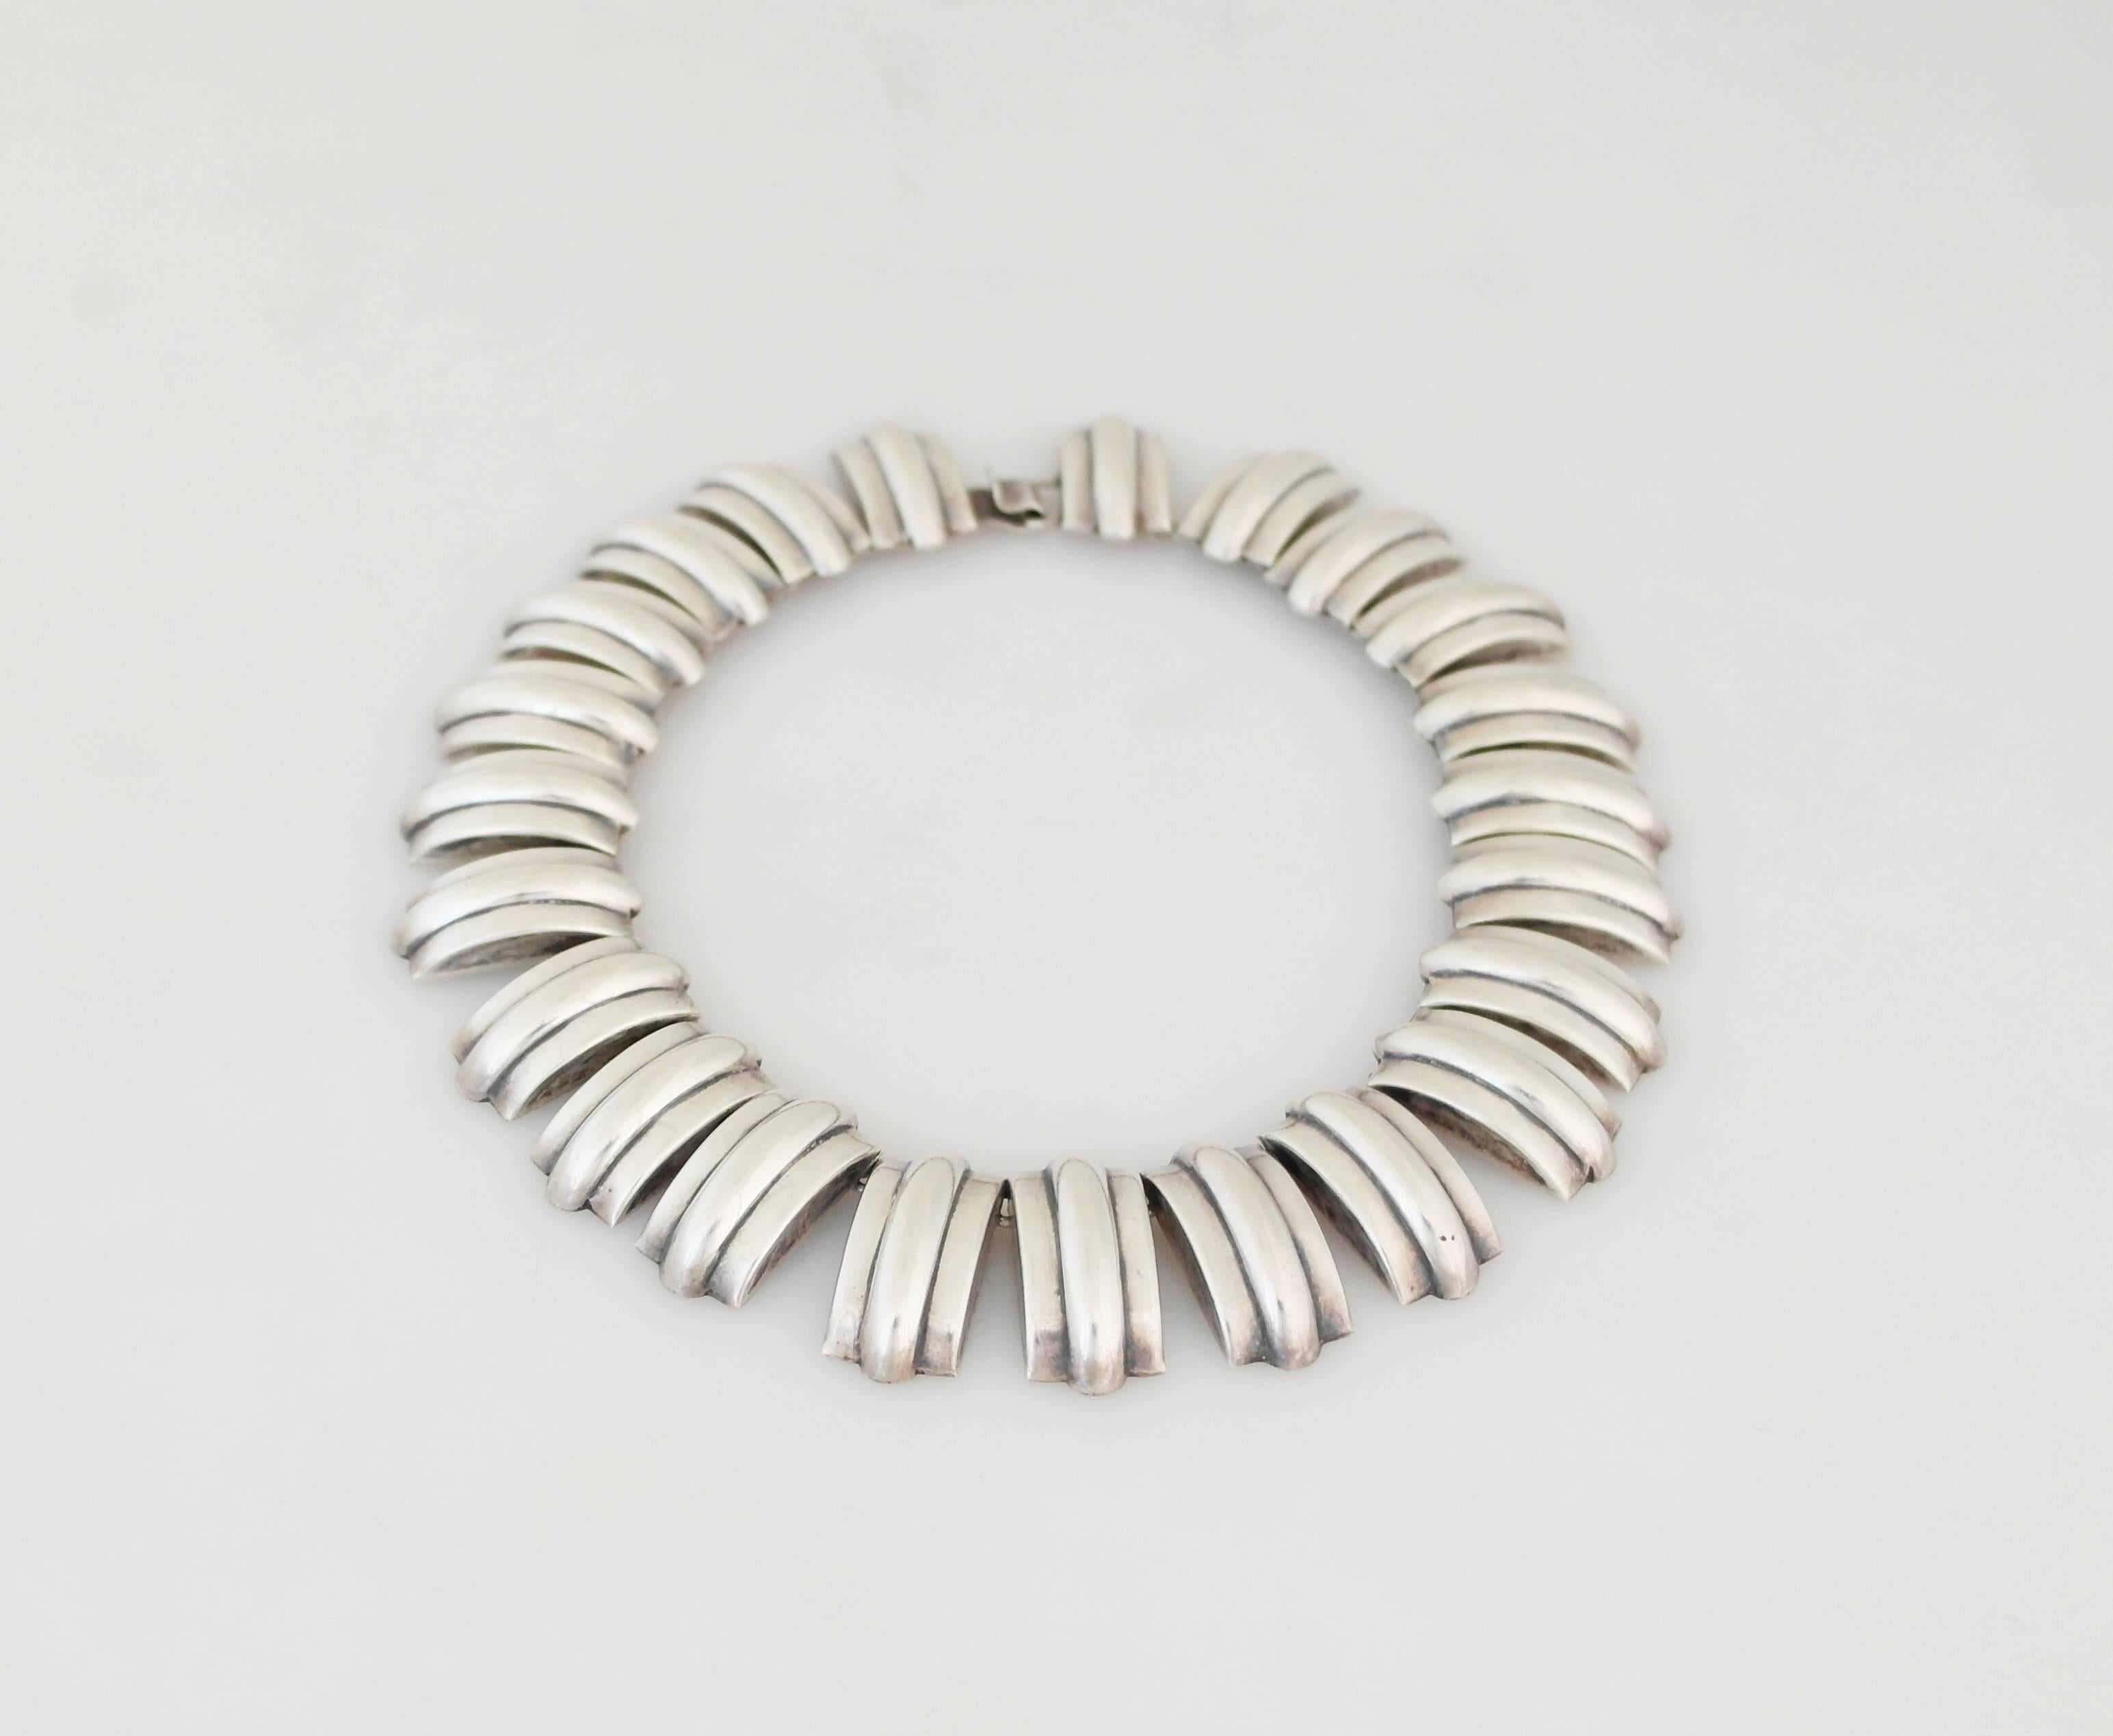 Being offered is a circa 1940 sterling silver necklace designed by Fred Davis for Sanborn's of Mexico. Art Deco inspired piece; each link attached by 'o' rings; secured by a tongue & box closure. Dimensions: wearable 14 inches x 1 inch wide. Marked